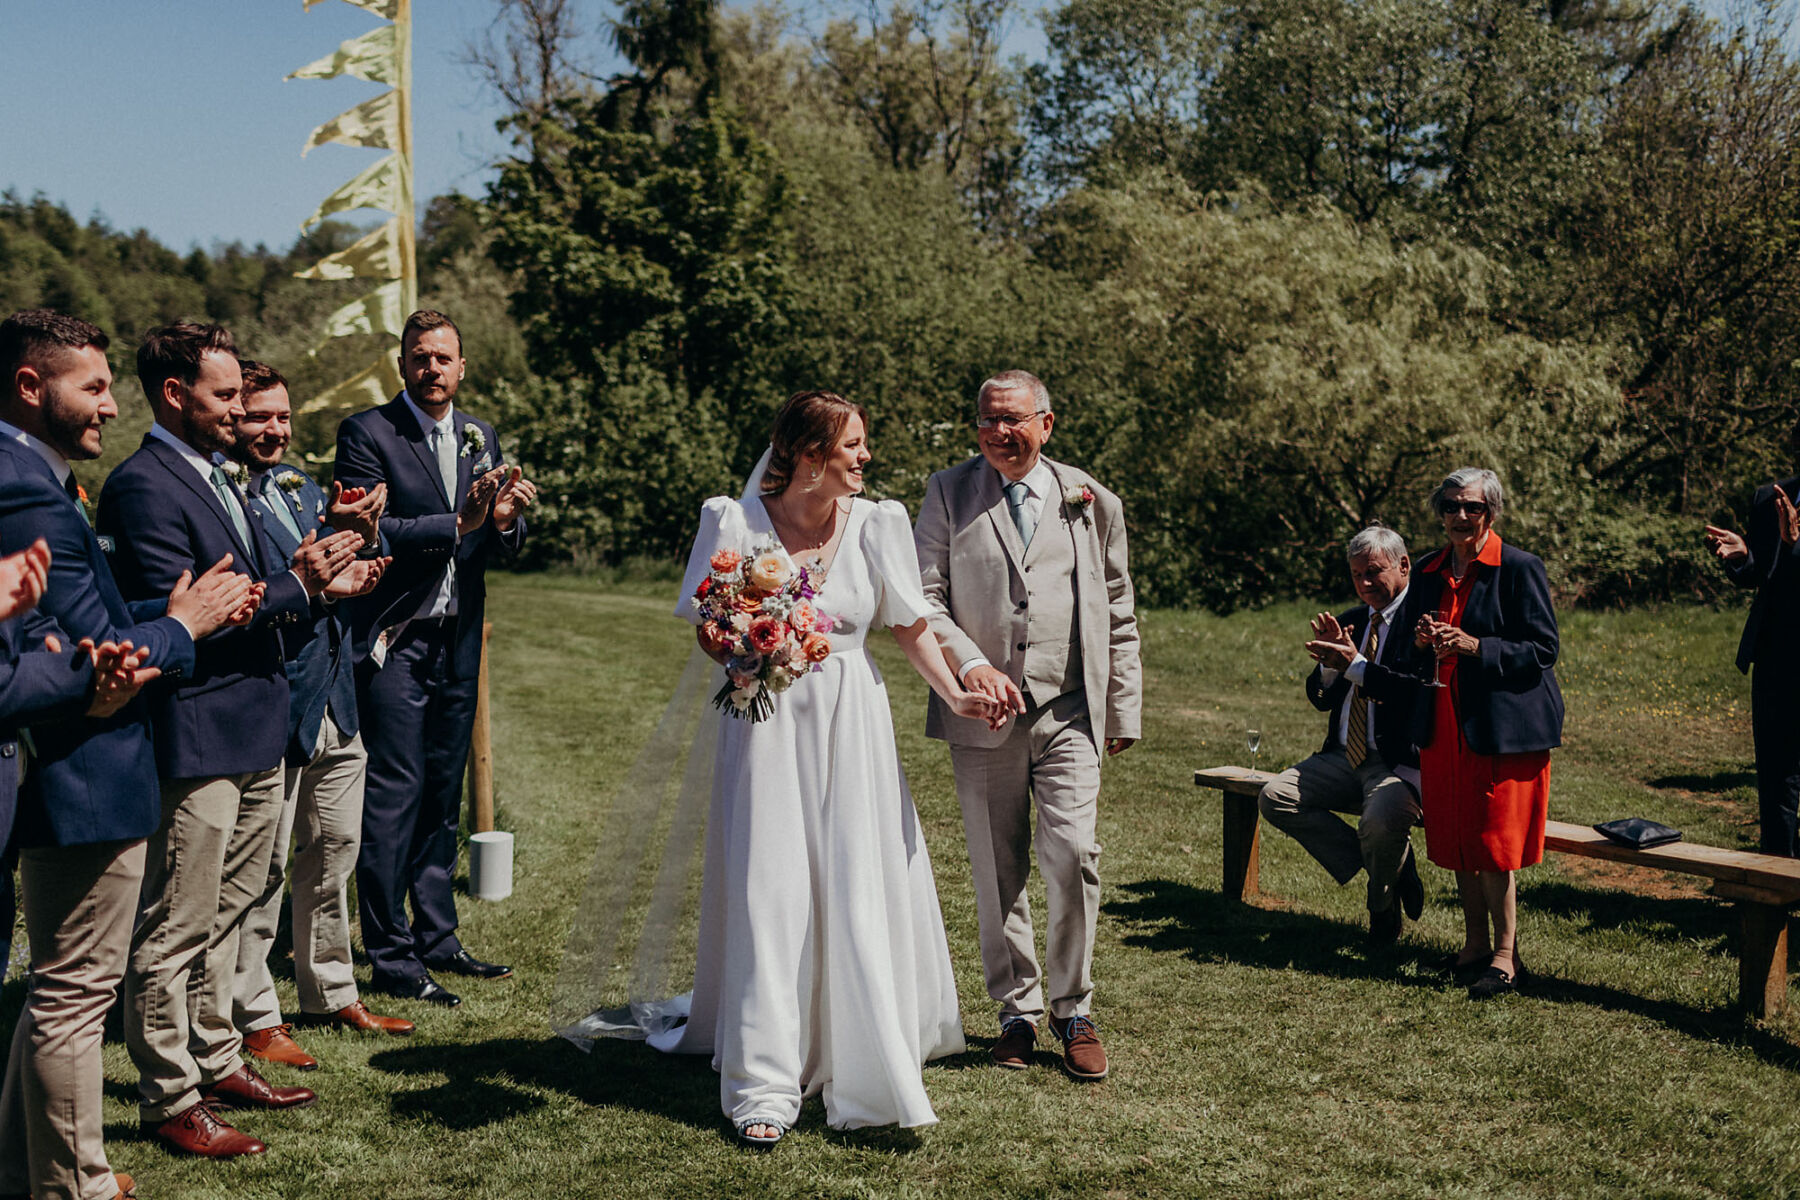 Father of the bride accompanying his daughter down the grassy aisle. Outdoor wedding at Hadsham farm.